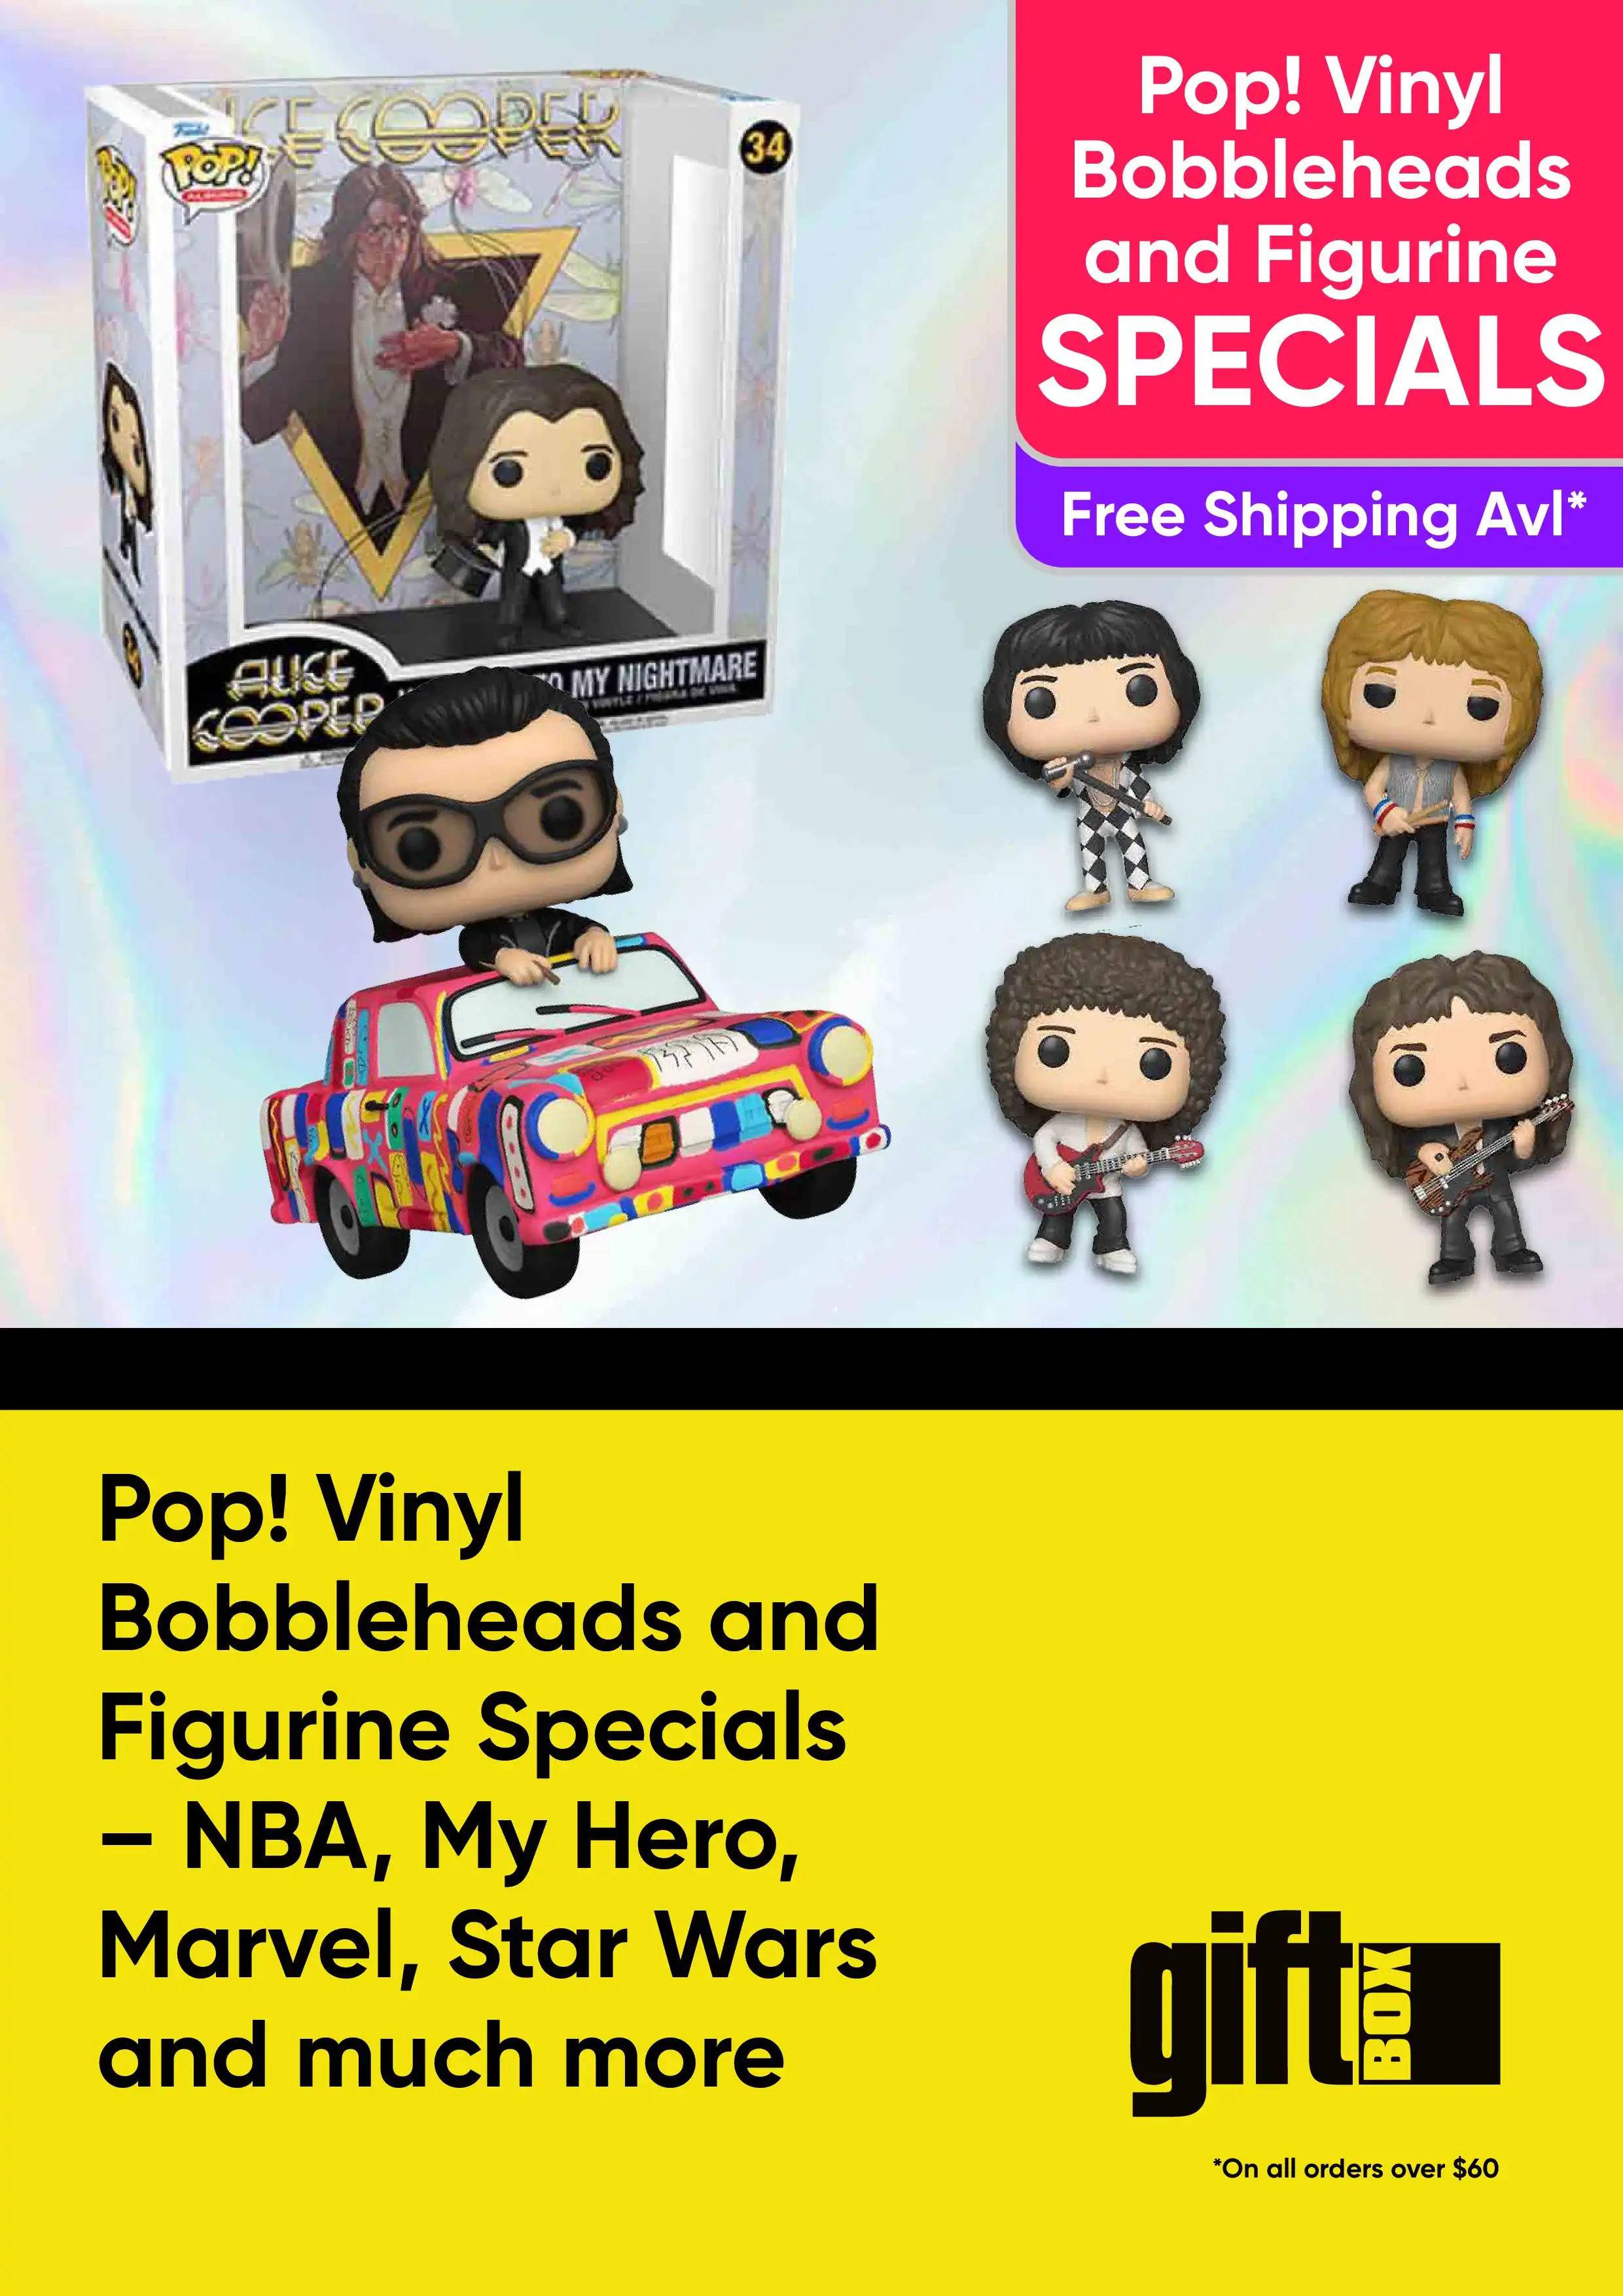 Pop! Vinyl Bobbleheads and Figurine Specials - NBA, My Hero, Marvel, Star Wars and More - Up to 40% off